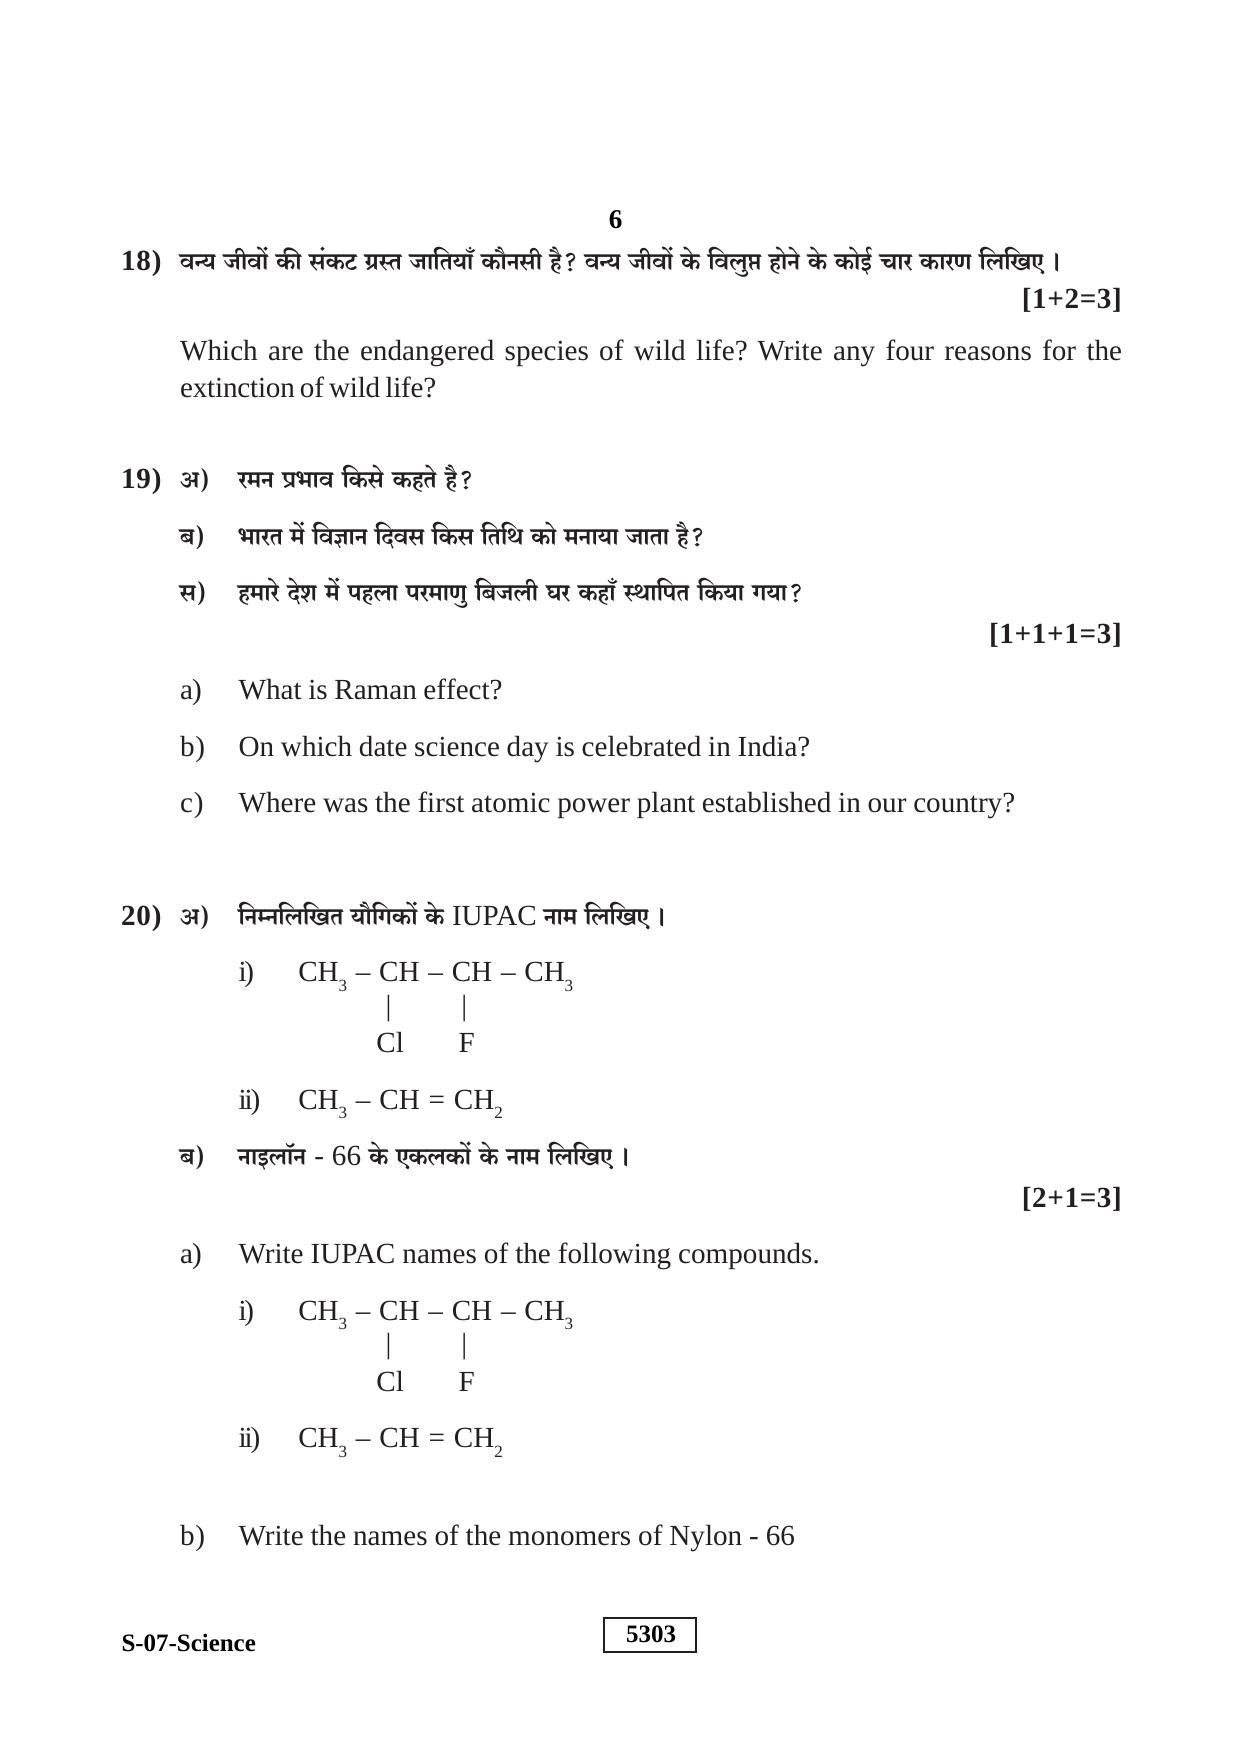 RBSE Class 10 Science 2020 Question Paper - Page 6